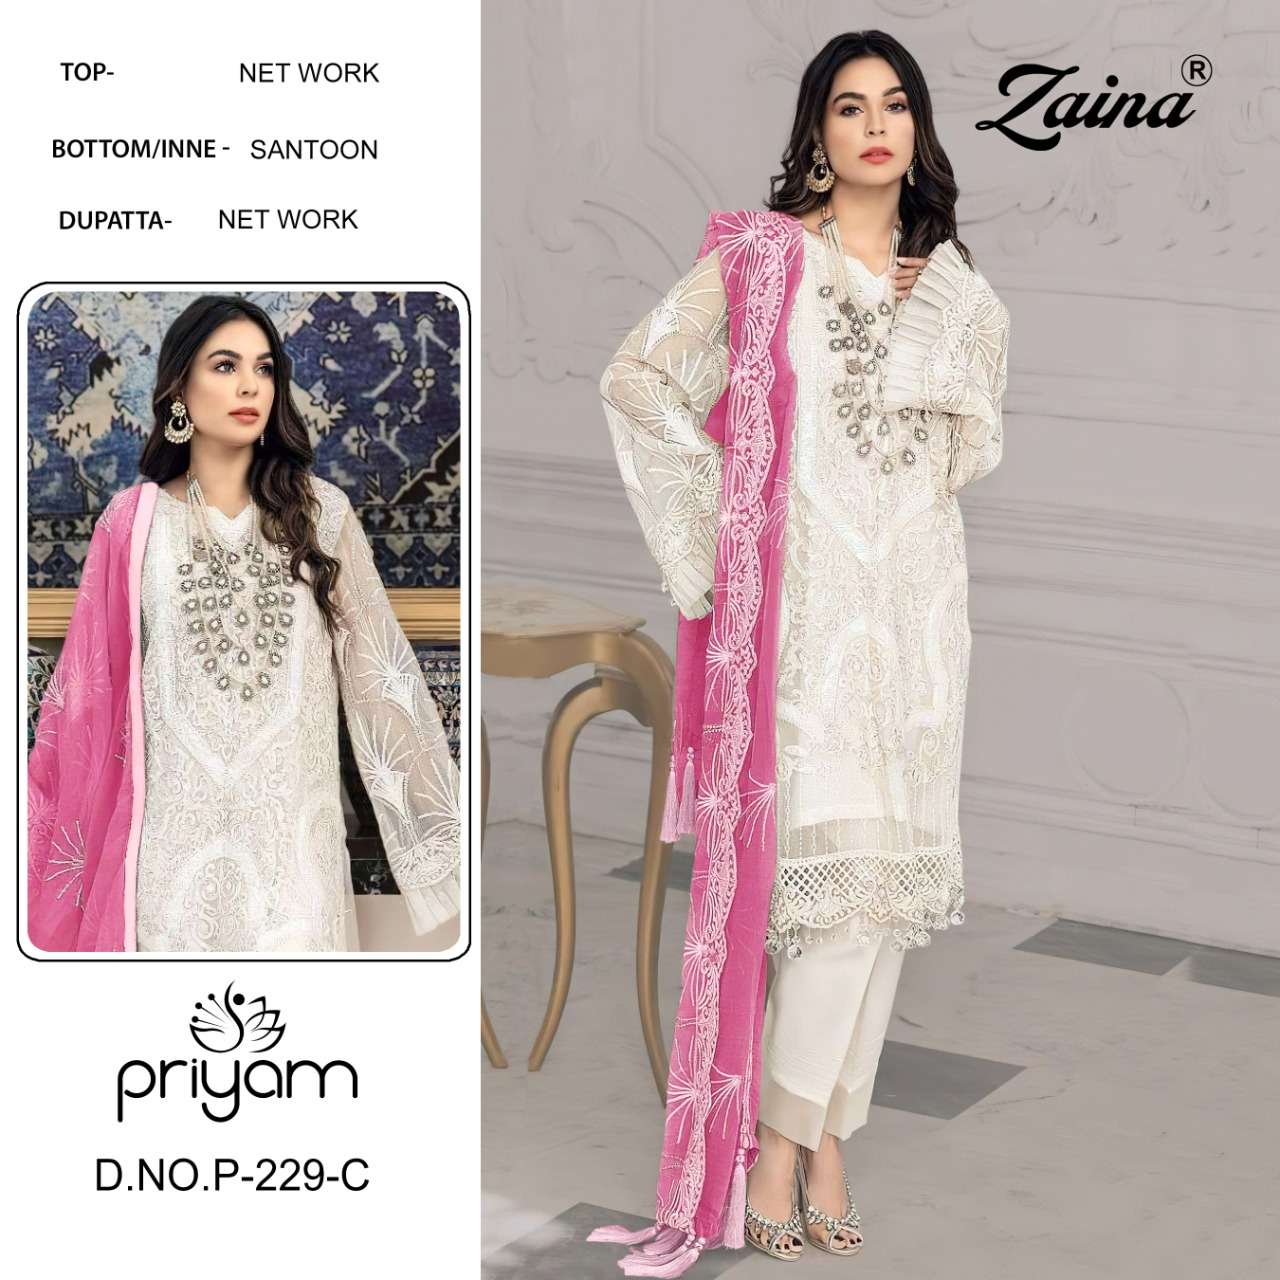 ZAINA VOL-29 BY PRIYAM 229-A TO 229-D SERIES DESIGNER PAKISTANI SUITS BEAUTIFUL STYLISH FANCY COLORFUL PARTY WEAR & OCCASIONAL WEAR NET DRESSES AT WHOLESALE PRICE